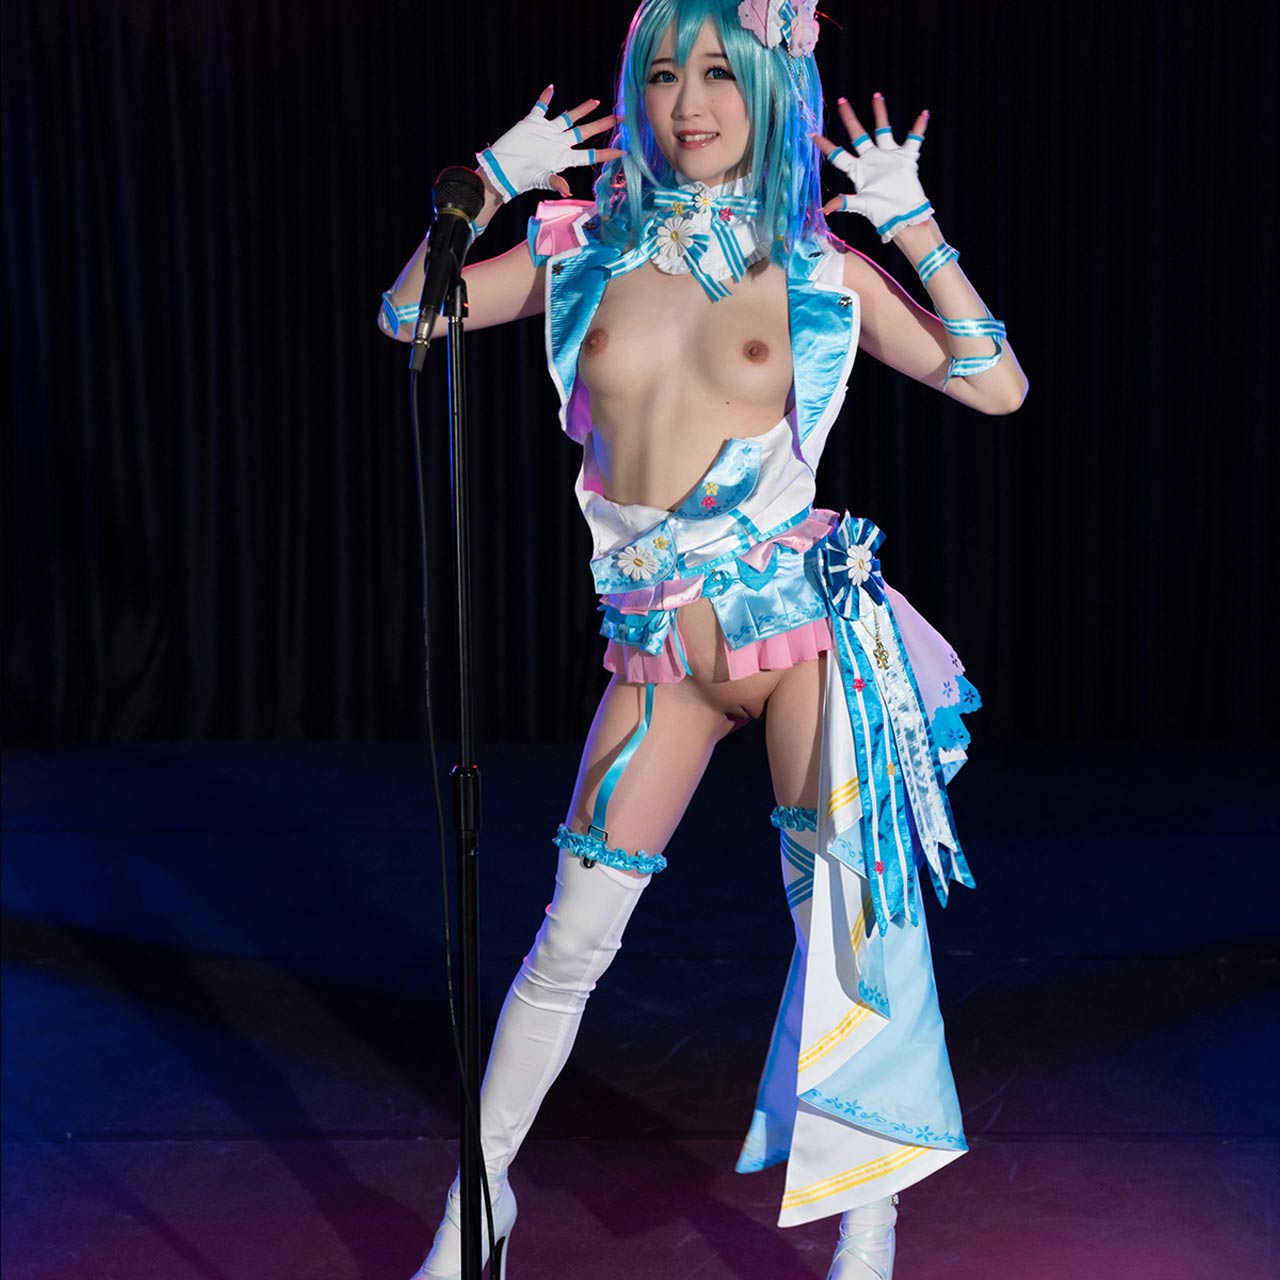 Ria Kurumi flashing her shaved pussy on stage. A nude Cosplay girl posing for Cospuri.